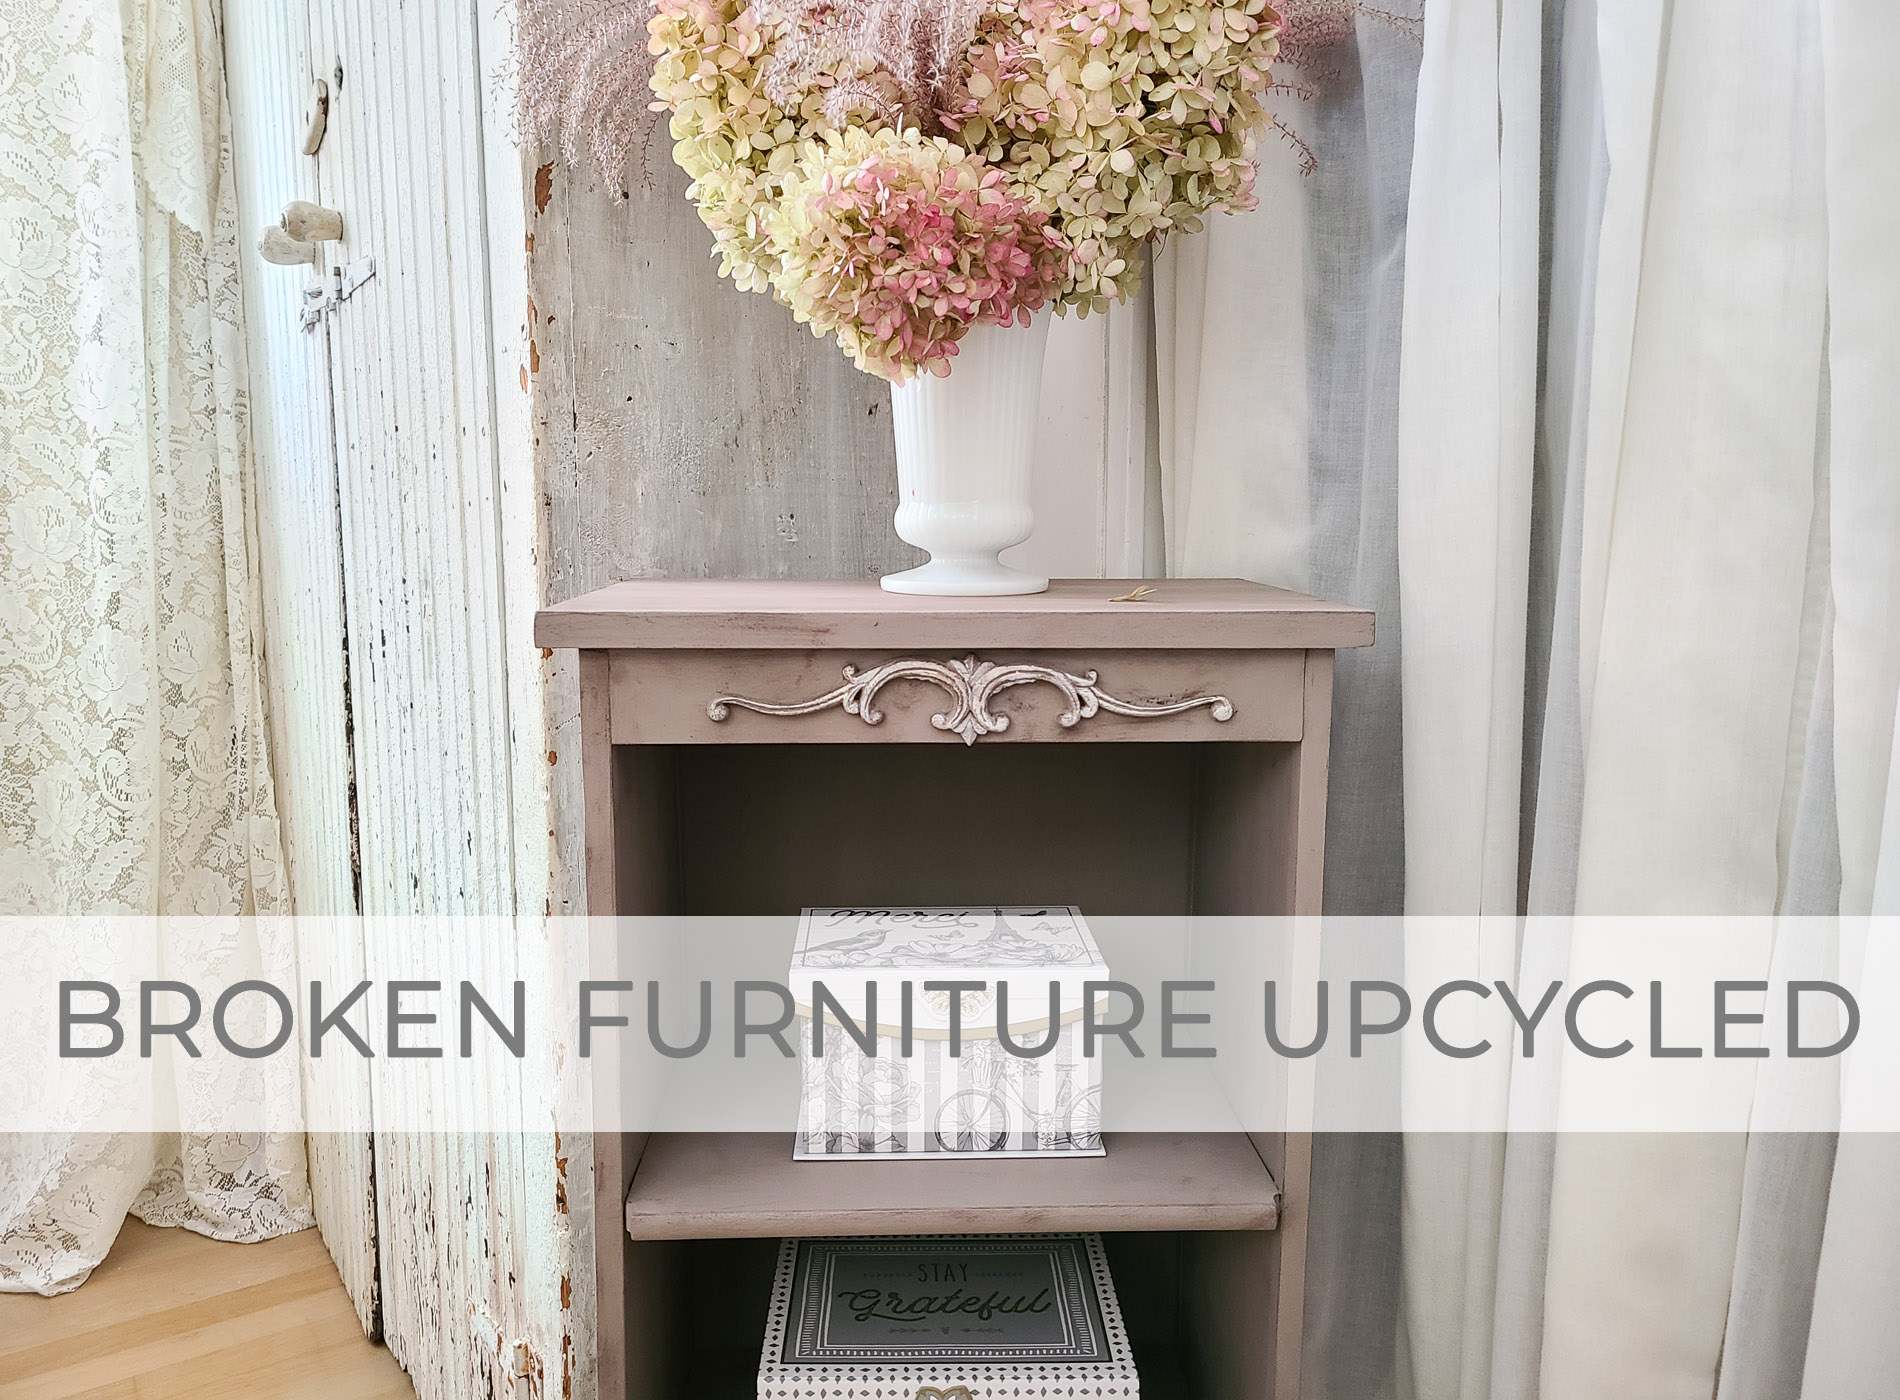 Broken Furniture Upcycled in to Home Decor | prodigalpieces.com #prodigalpieces